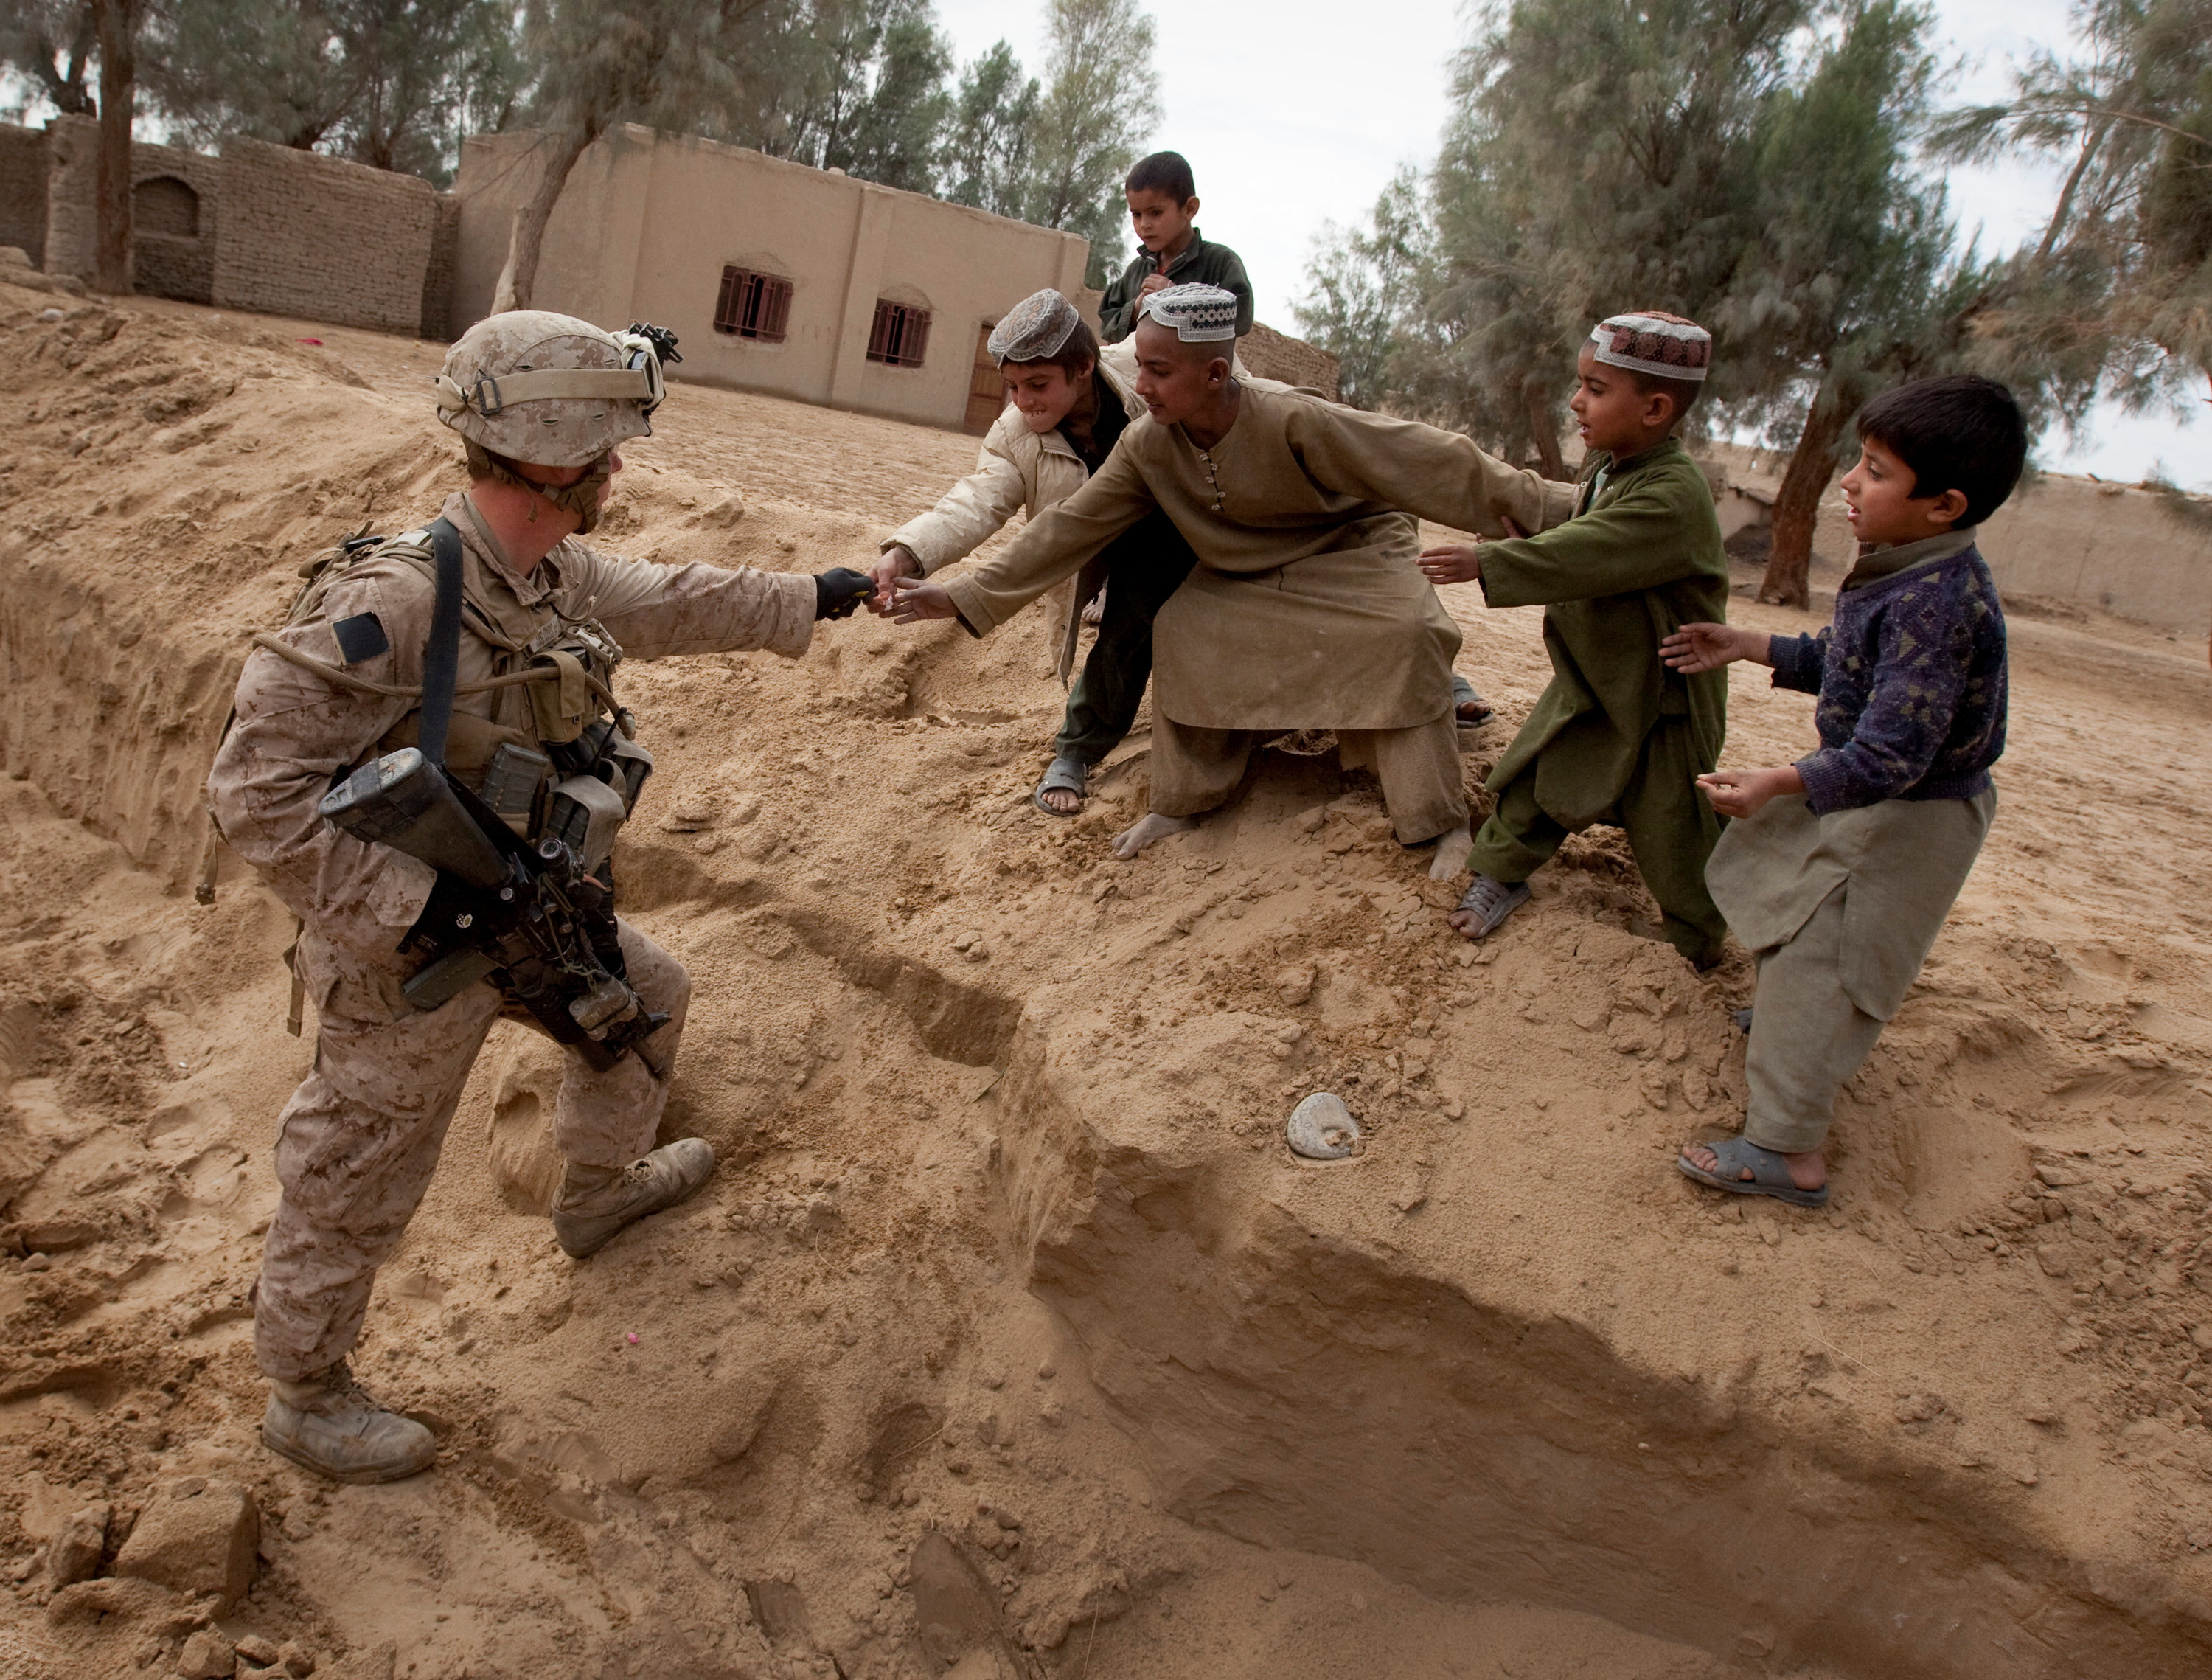 U.S. Marine Selby hands candy to local Afghan boys while keeping guard over a meeting of leaders in the Garmsir district of Helmand Province